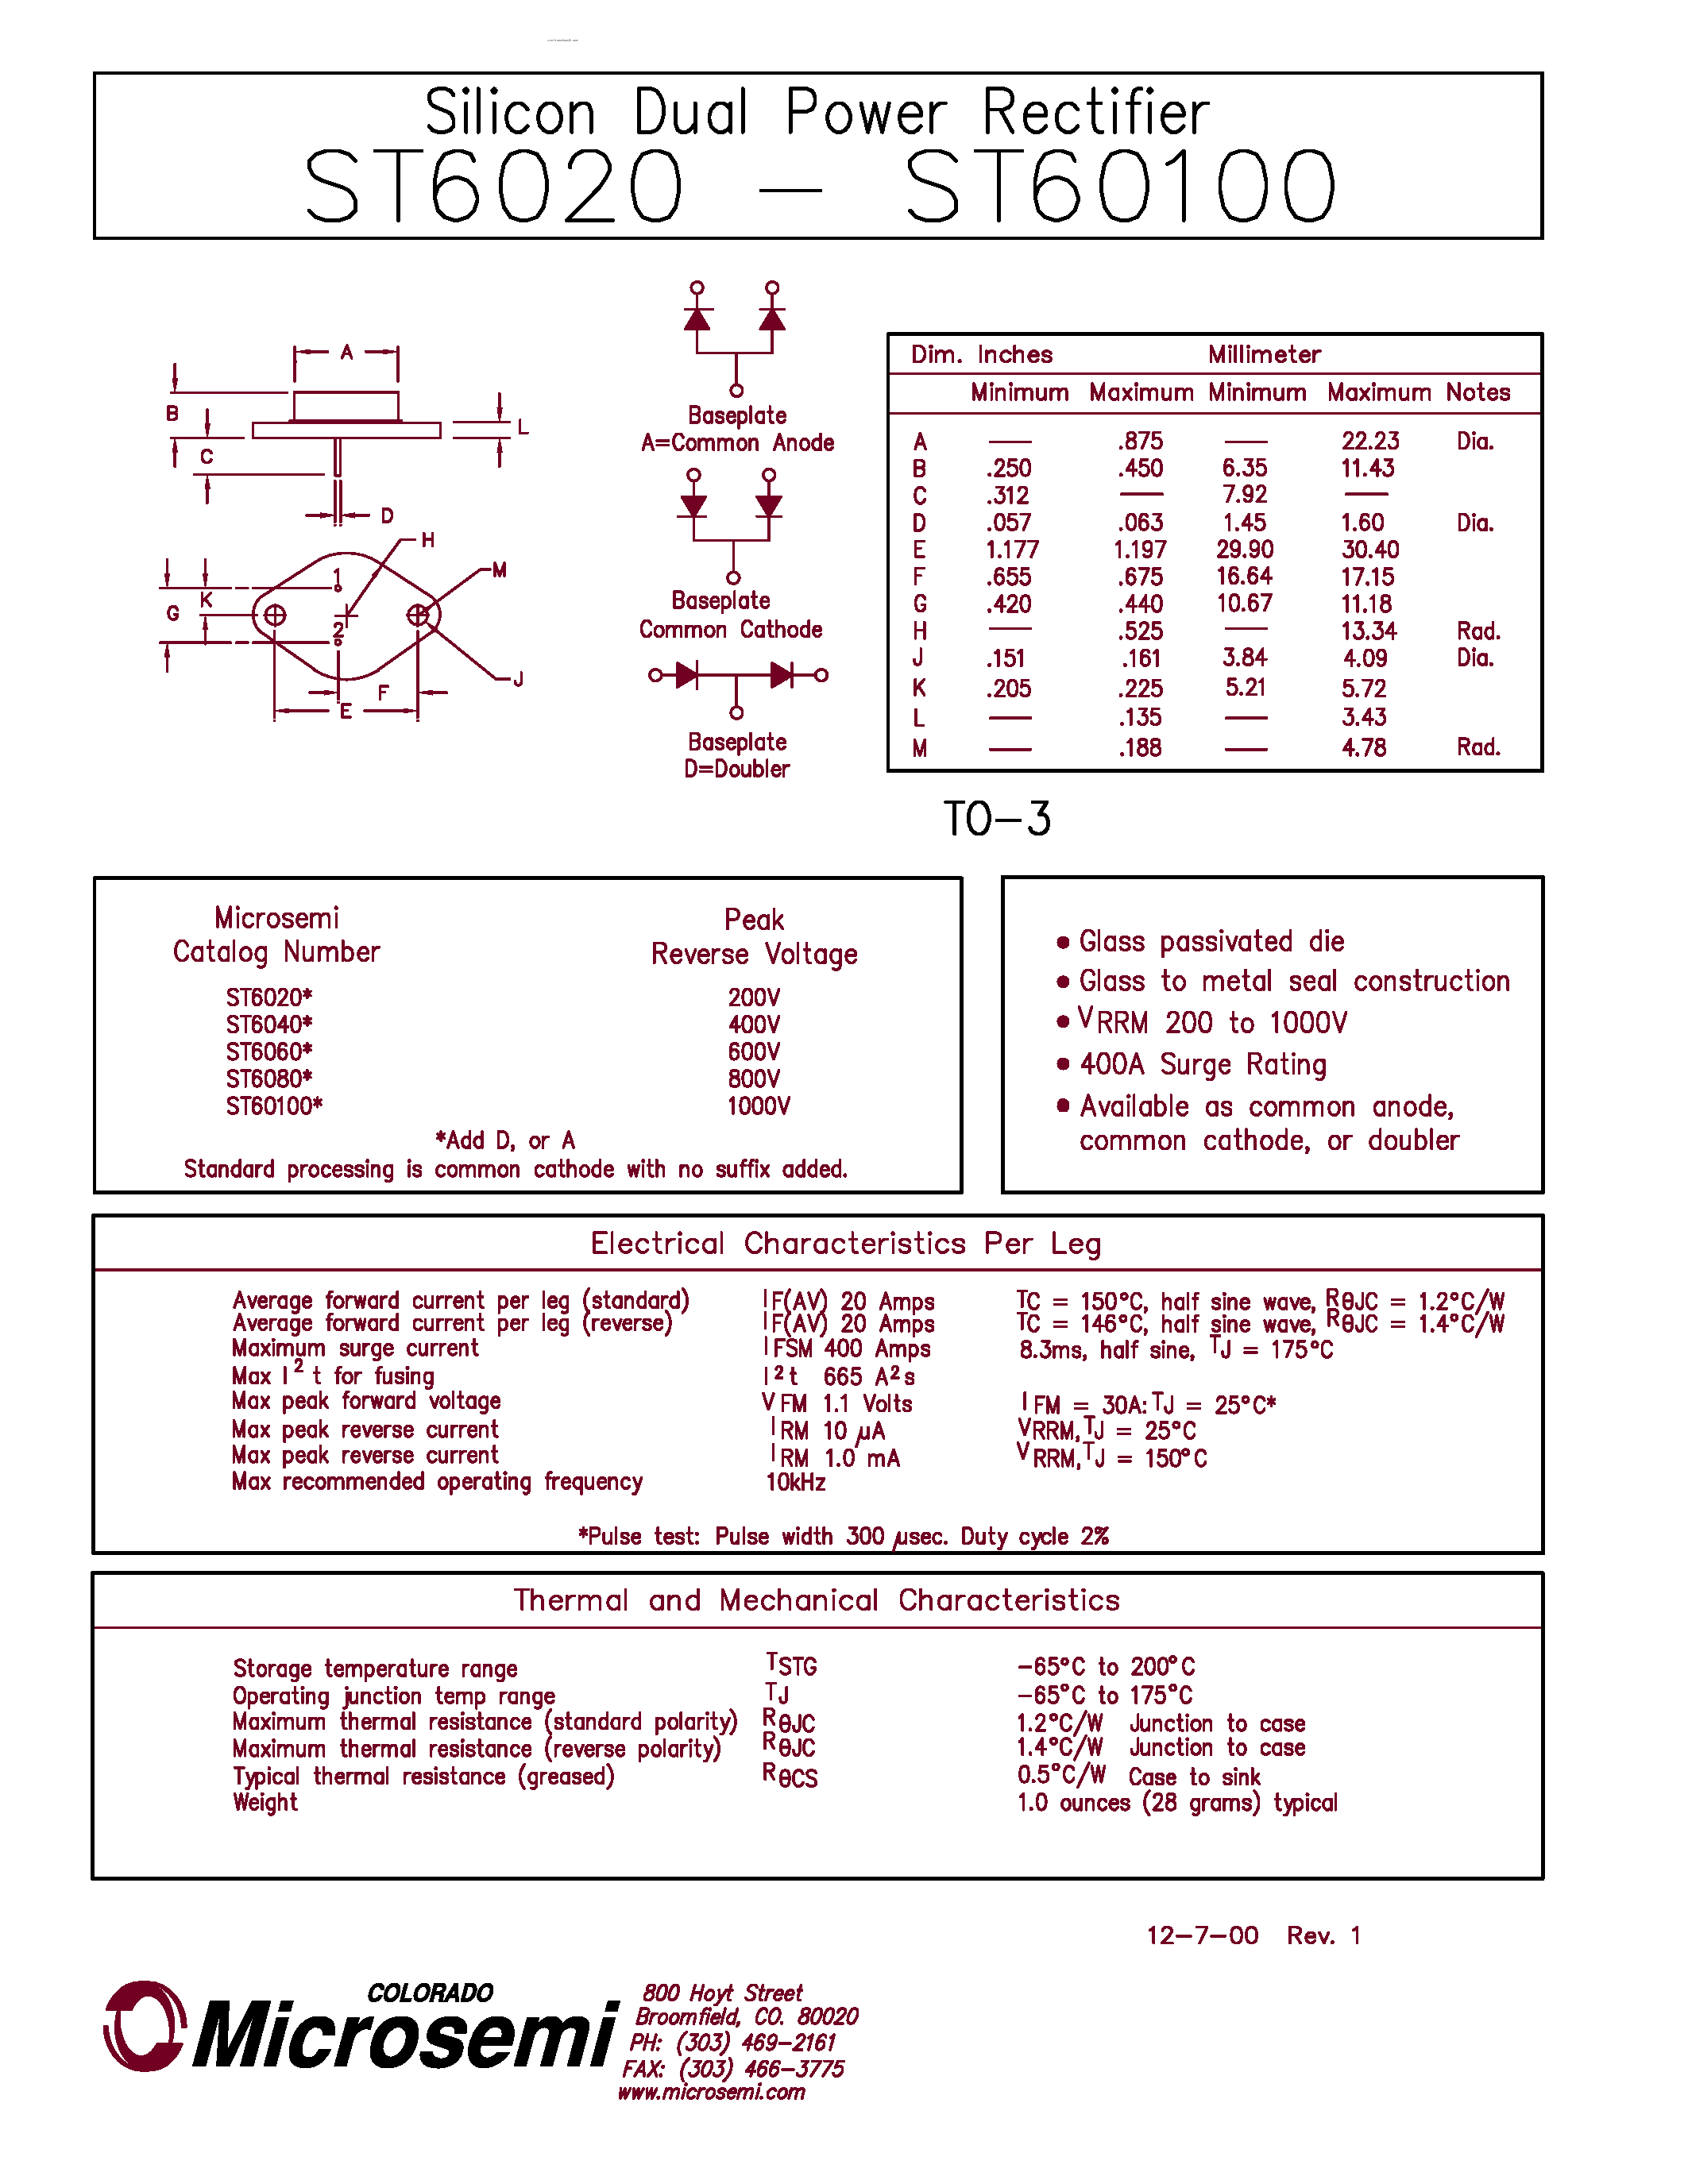 Datasheet ST60100 - (ST6020 - ST60100) Silicon Dual Power Rectifier page 1